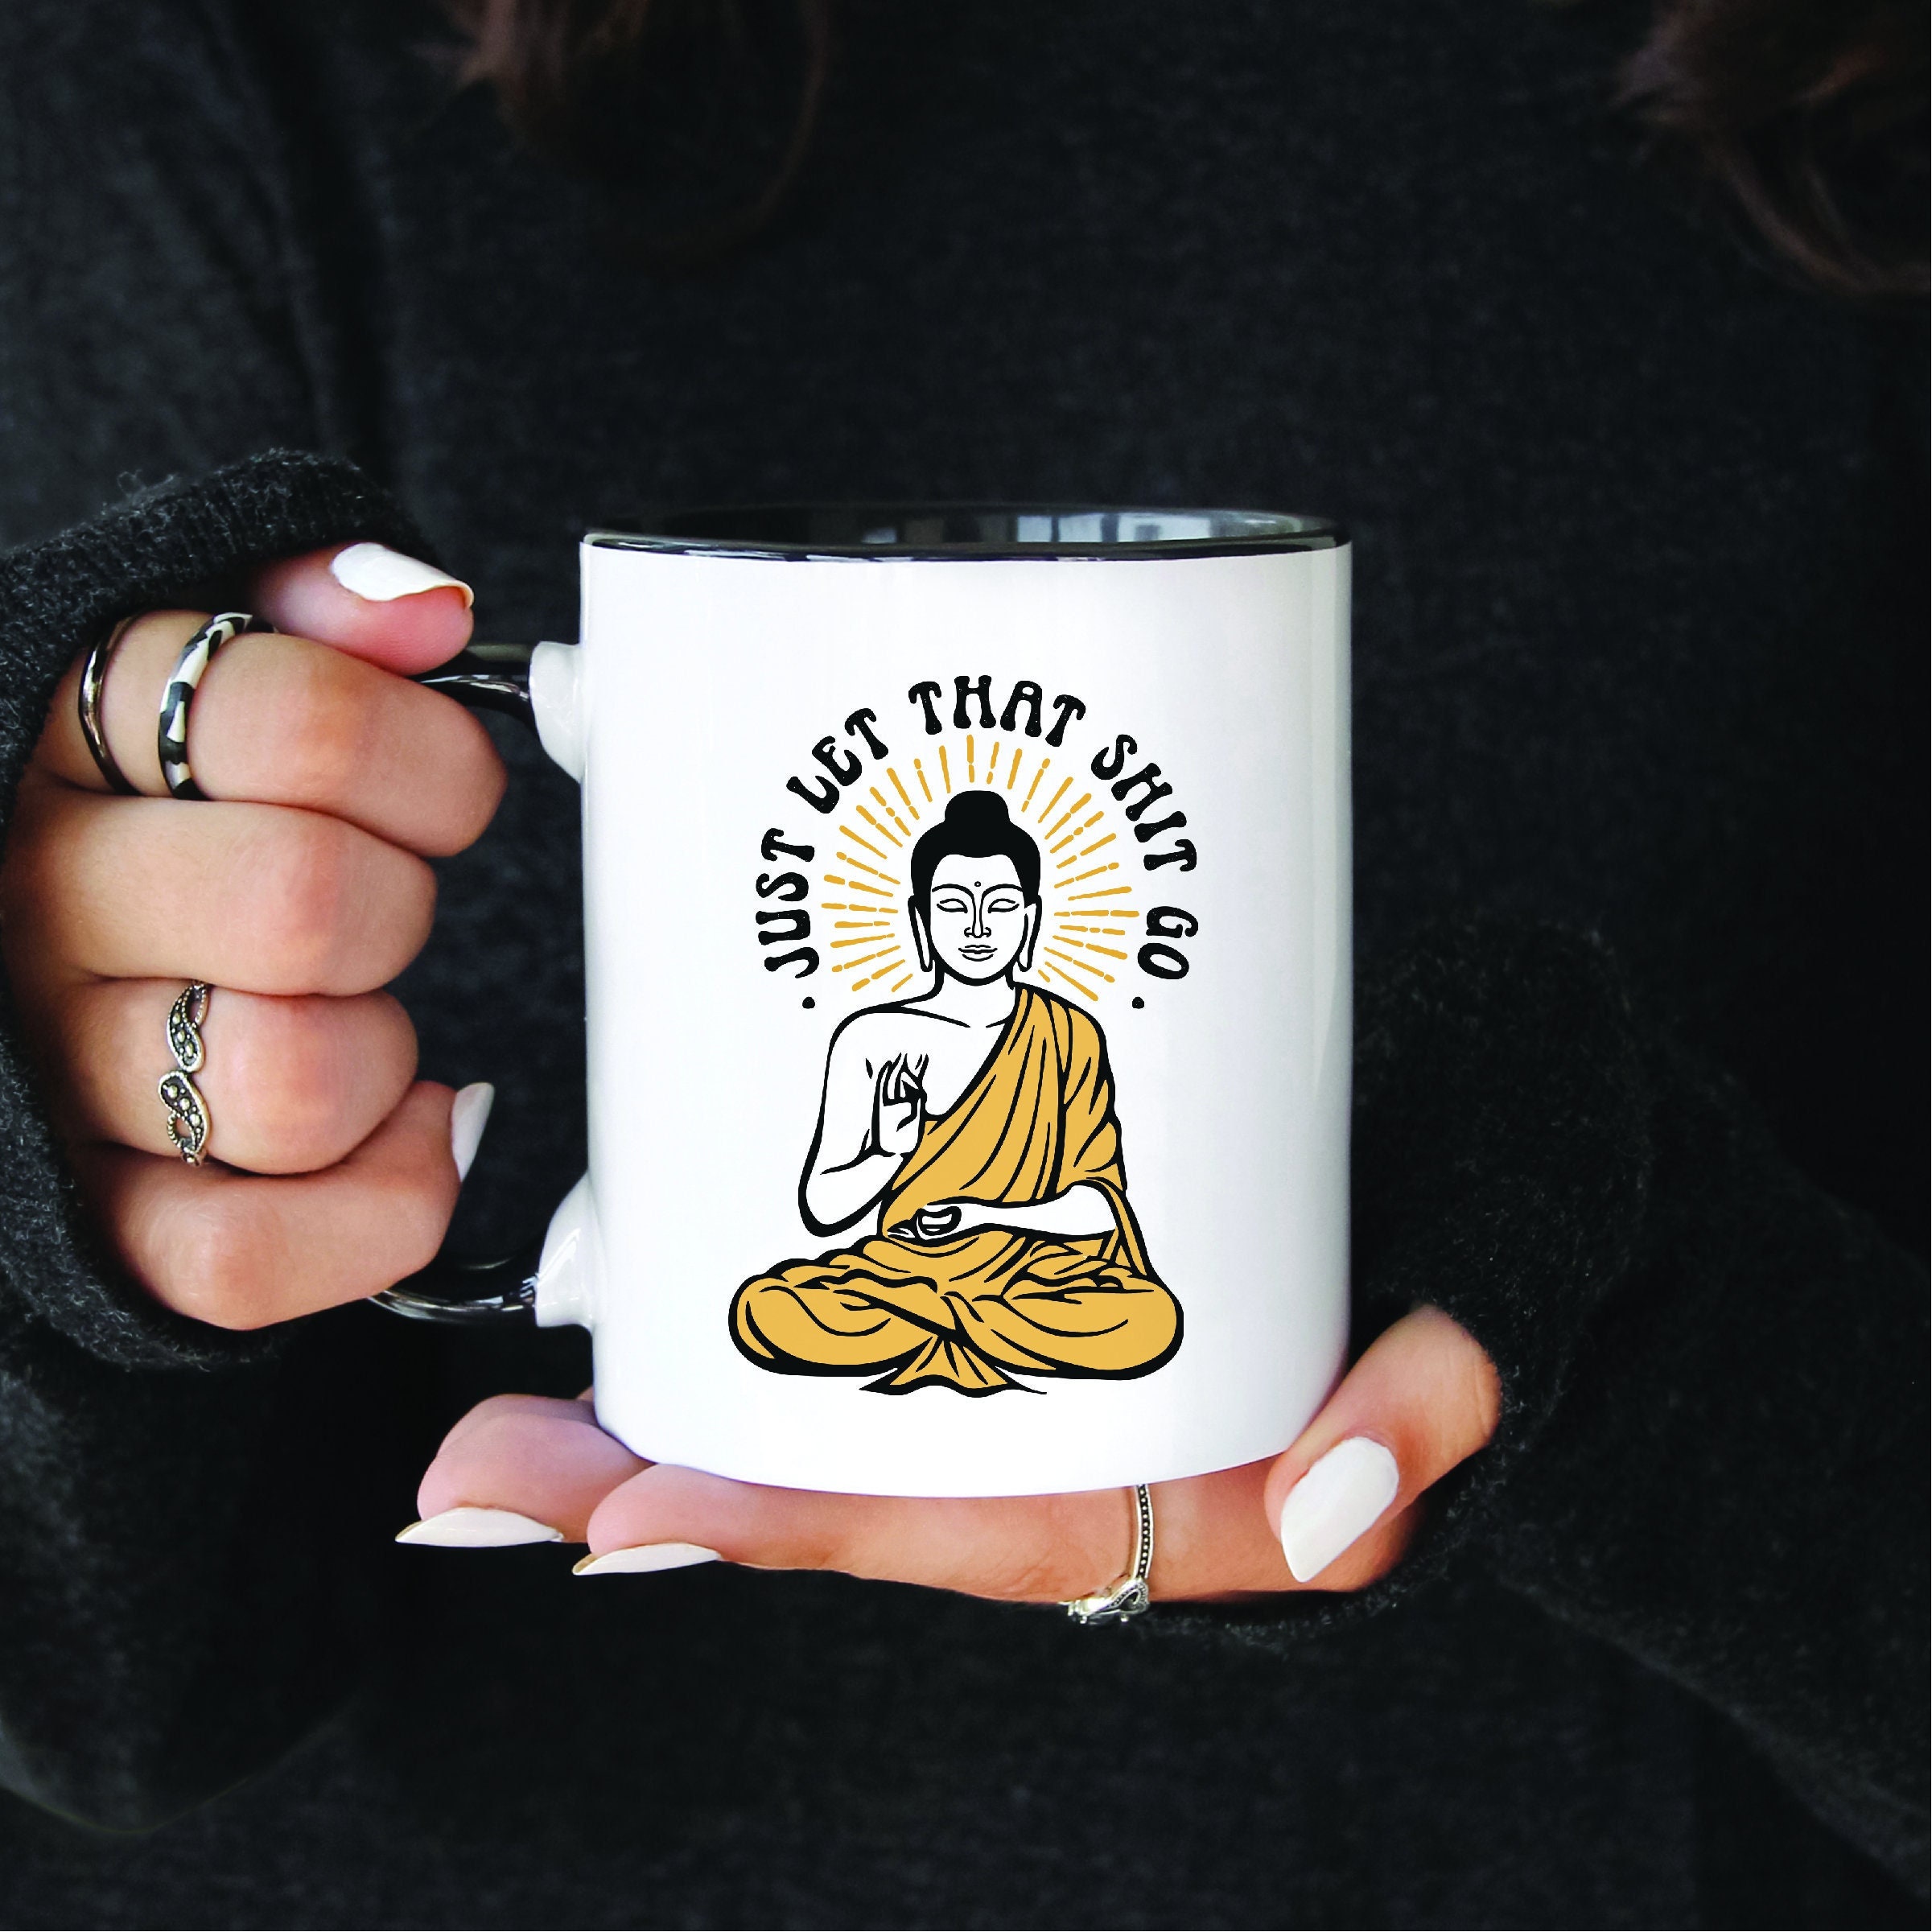 Let That Shit Go Element Mug– Talking Out Of Turn